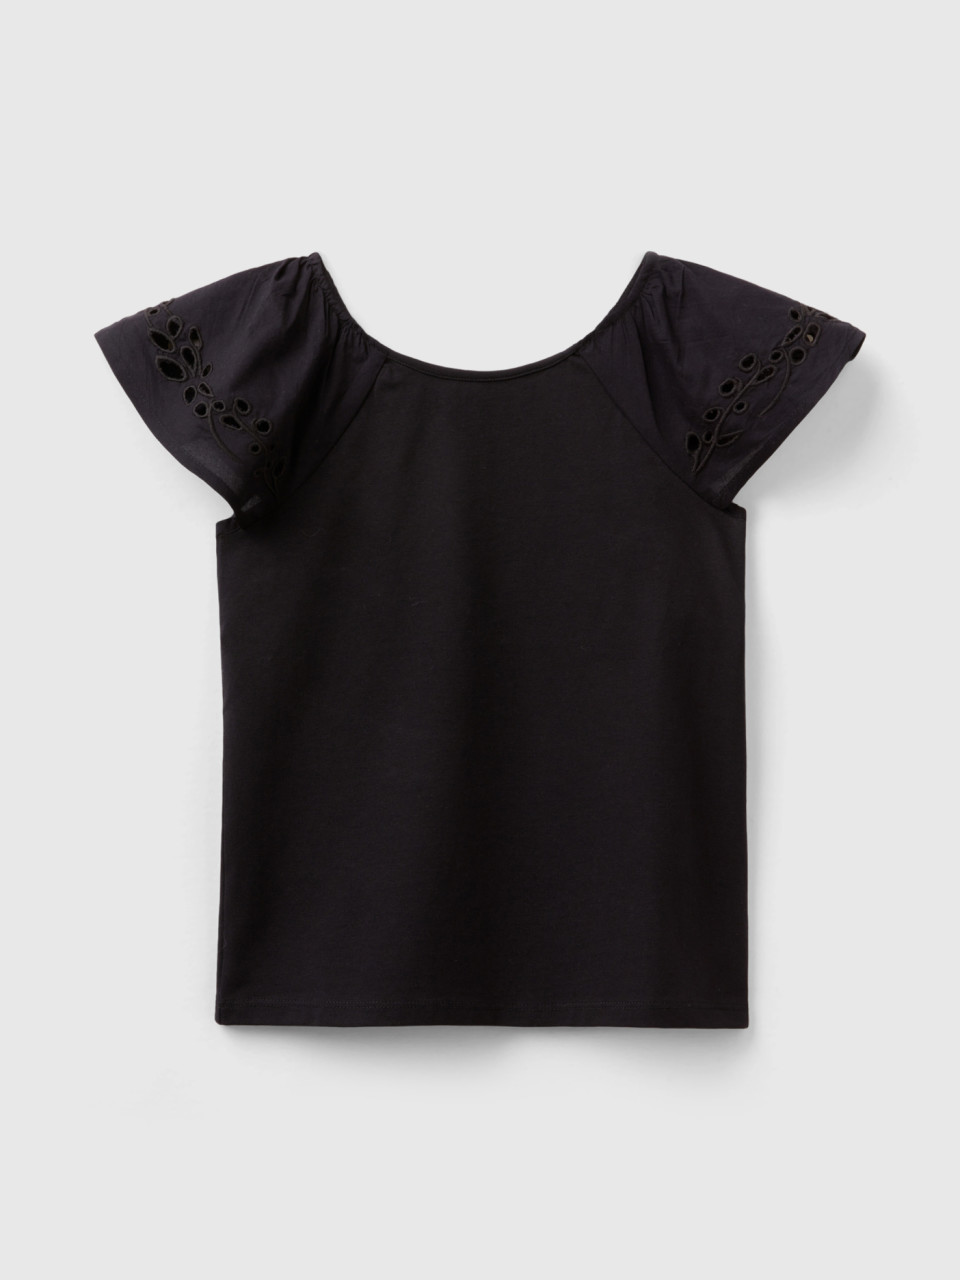 Benetton, Top With Embroidered Sleeves, Black, Kids